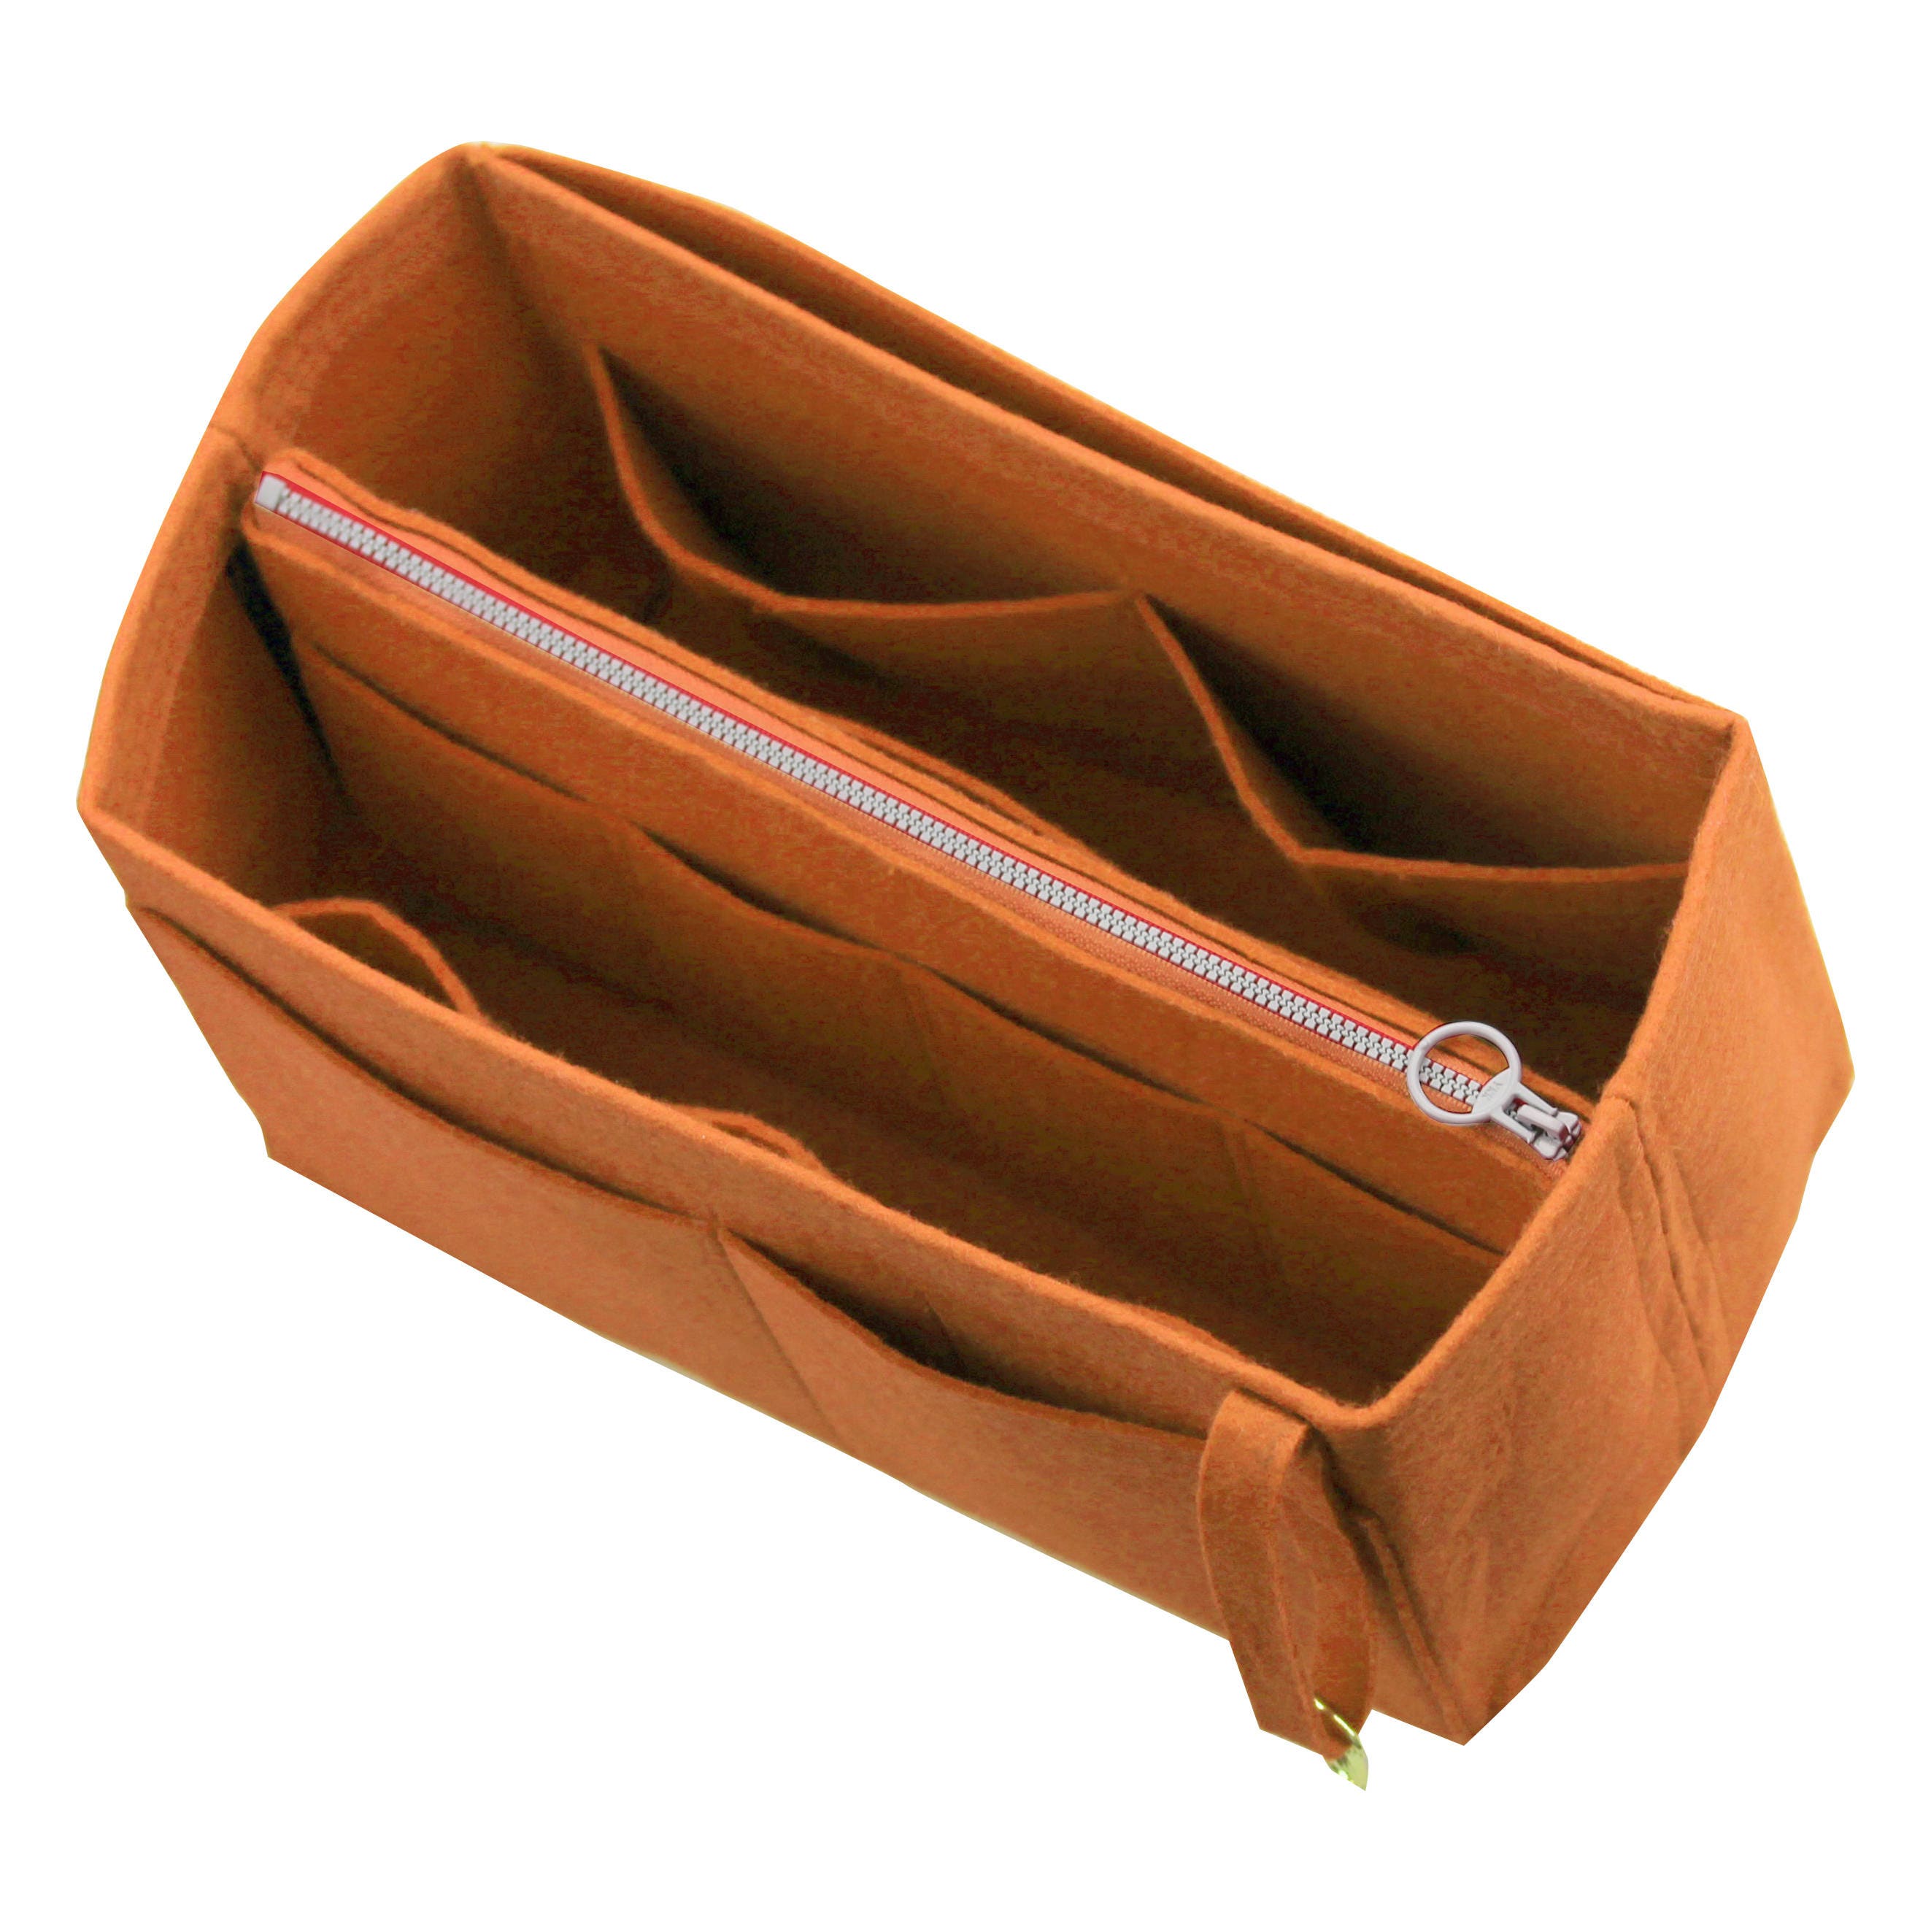 (*ON SALE / 2.55-Shopping-DS / + Removable Zipper Top / 2mm Brown) Bag  Organizer for CHA 2.55 Shopping Tote